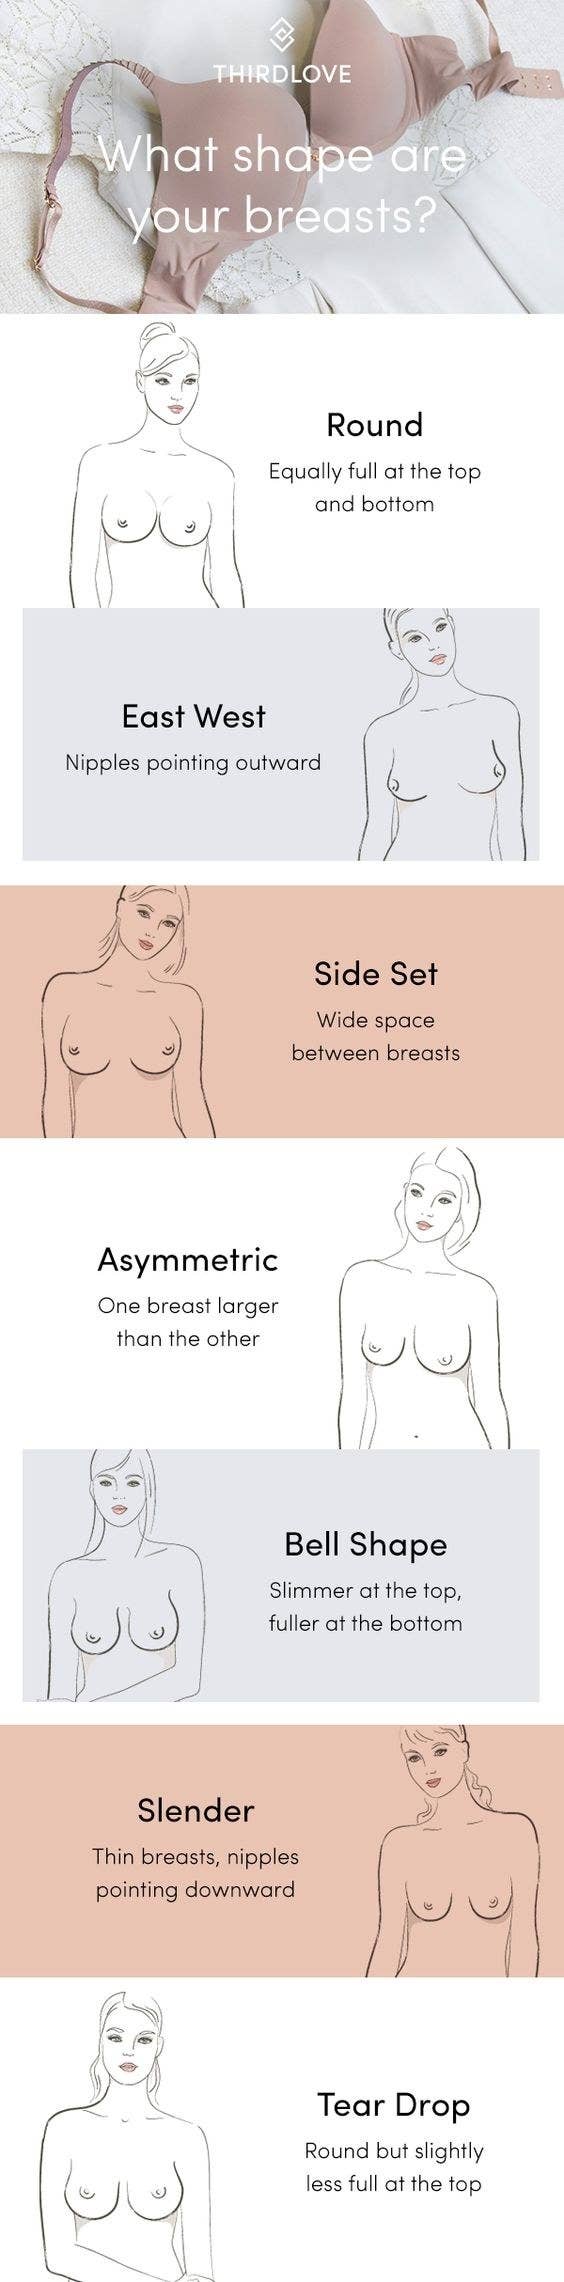 Side Set Boobs: What You Should Know